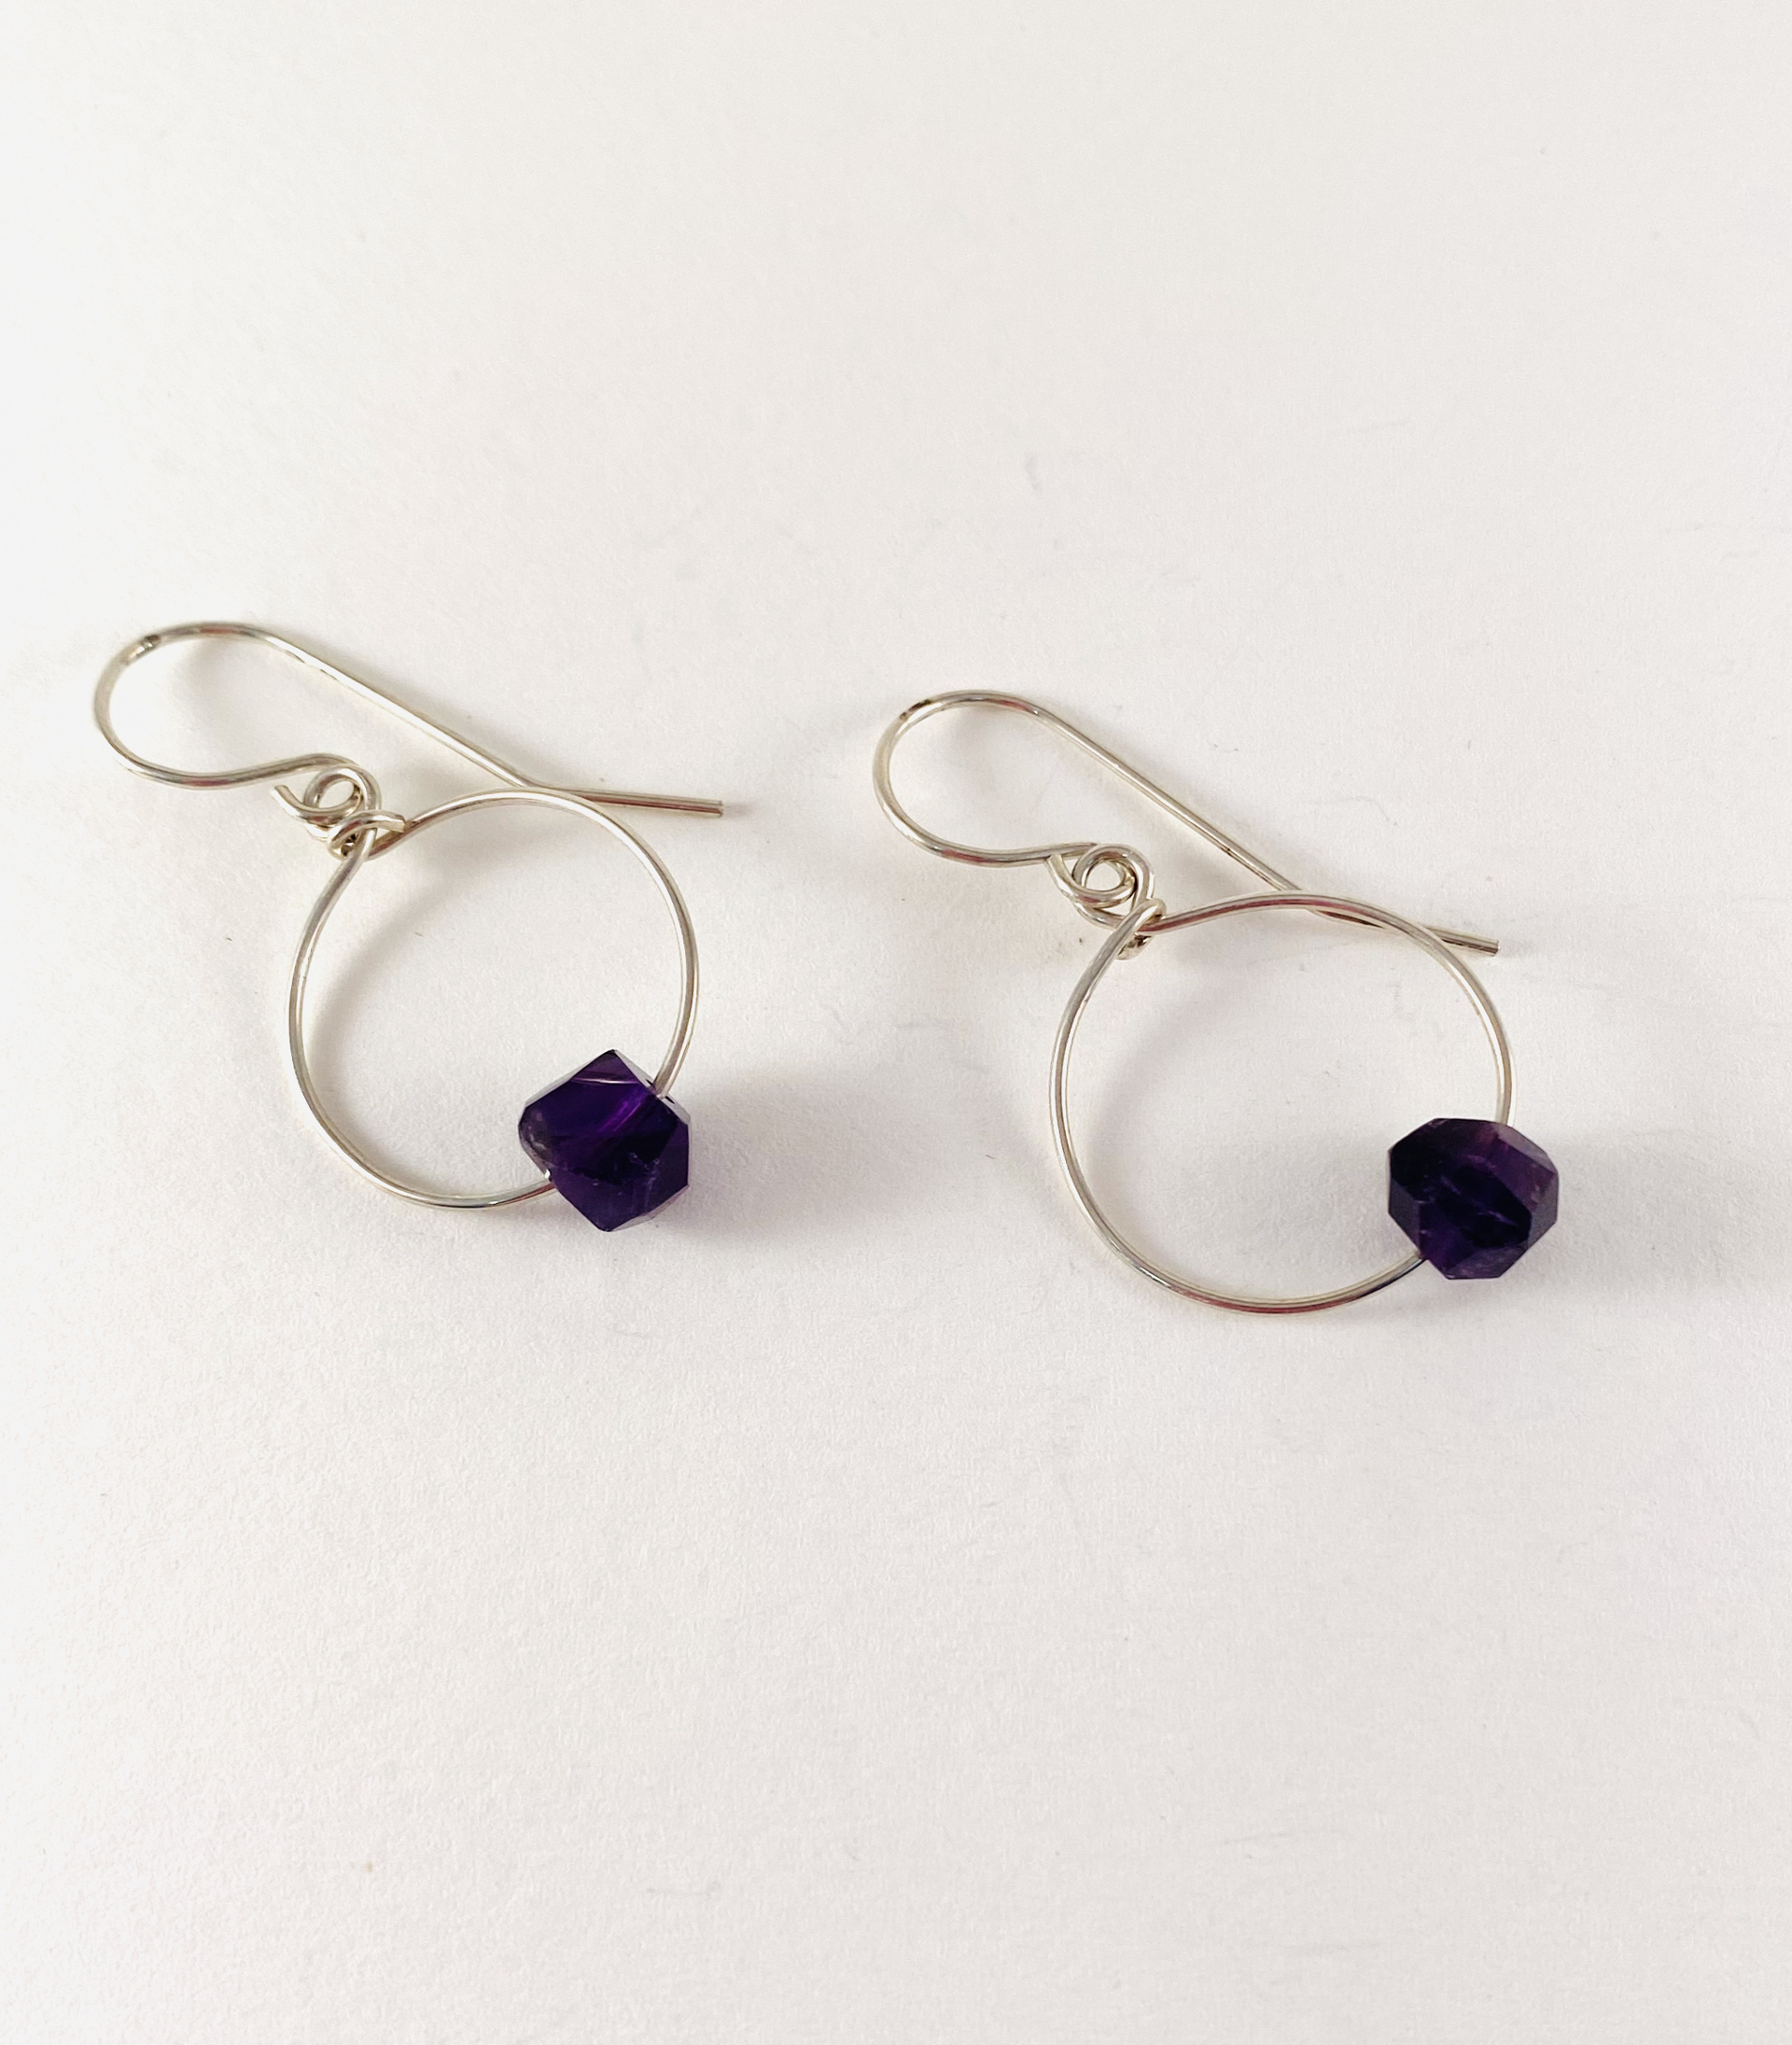 Silver and Amethyst bead Earrings by Shelby Lee - jewelry